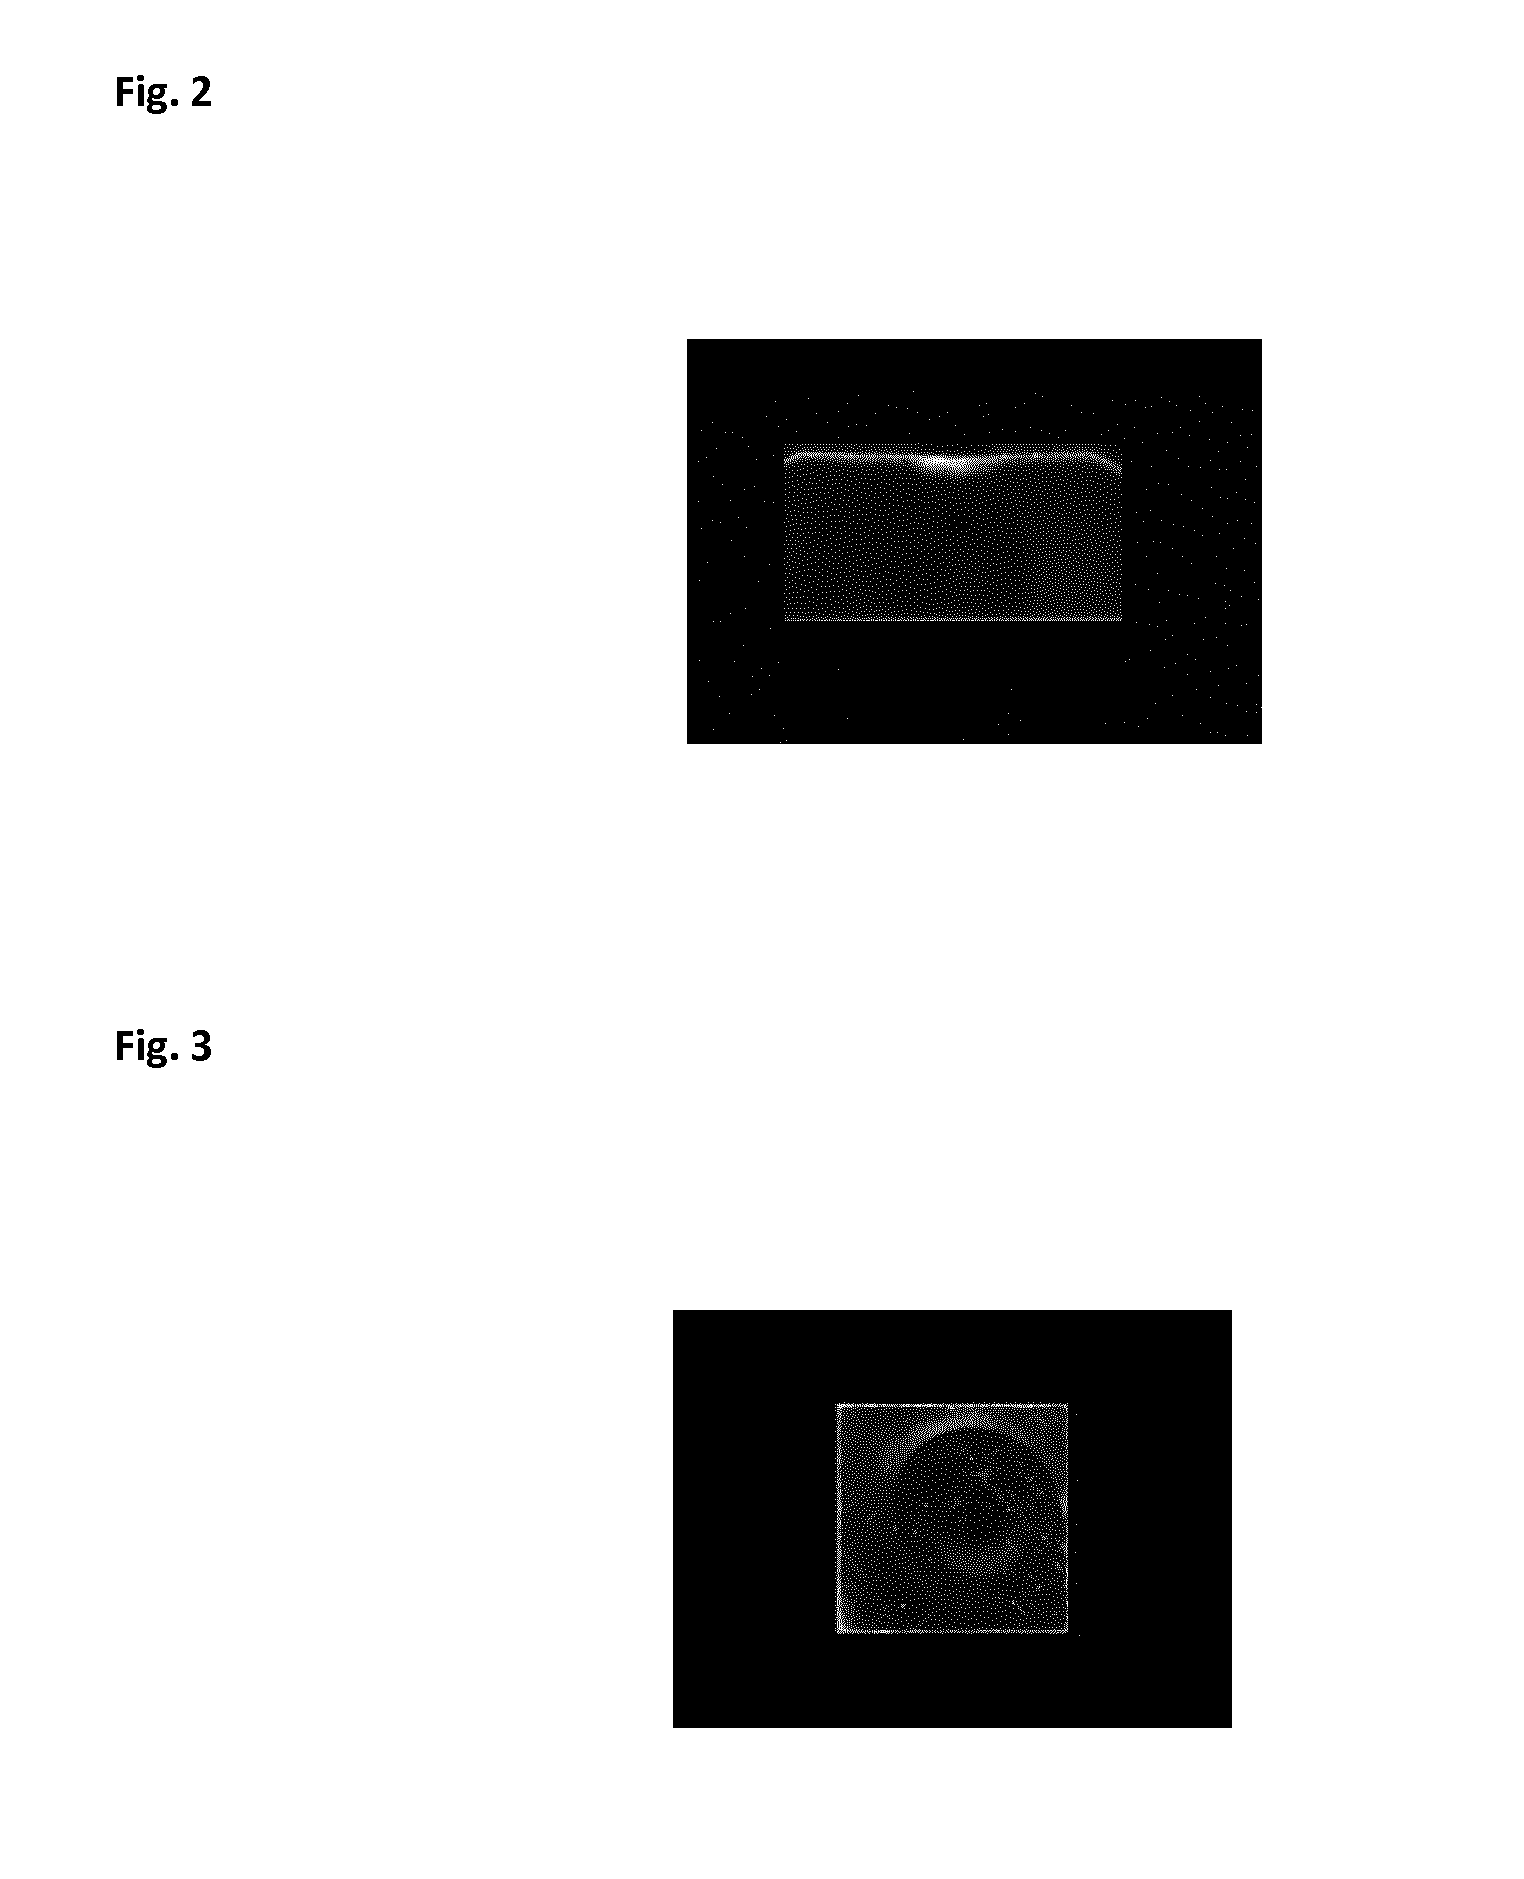 Methods of fabricating synthetic diamond materials using microwave plasma activated chemical vapour deposition techniques and products obtained using said methods